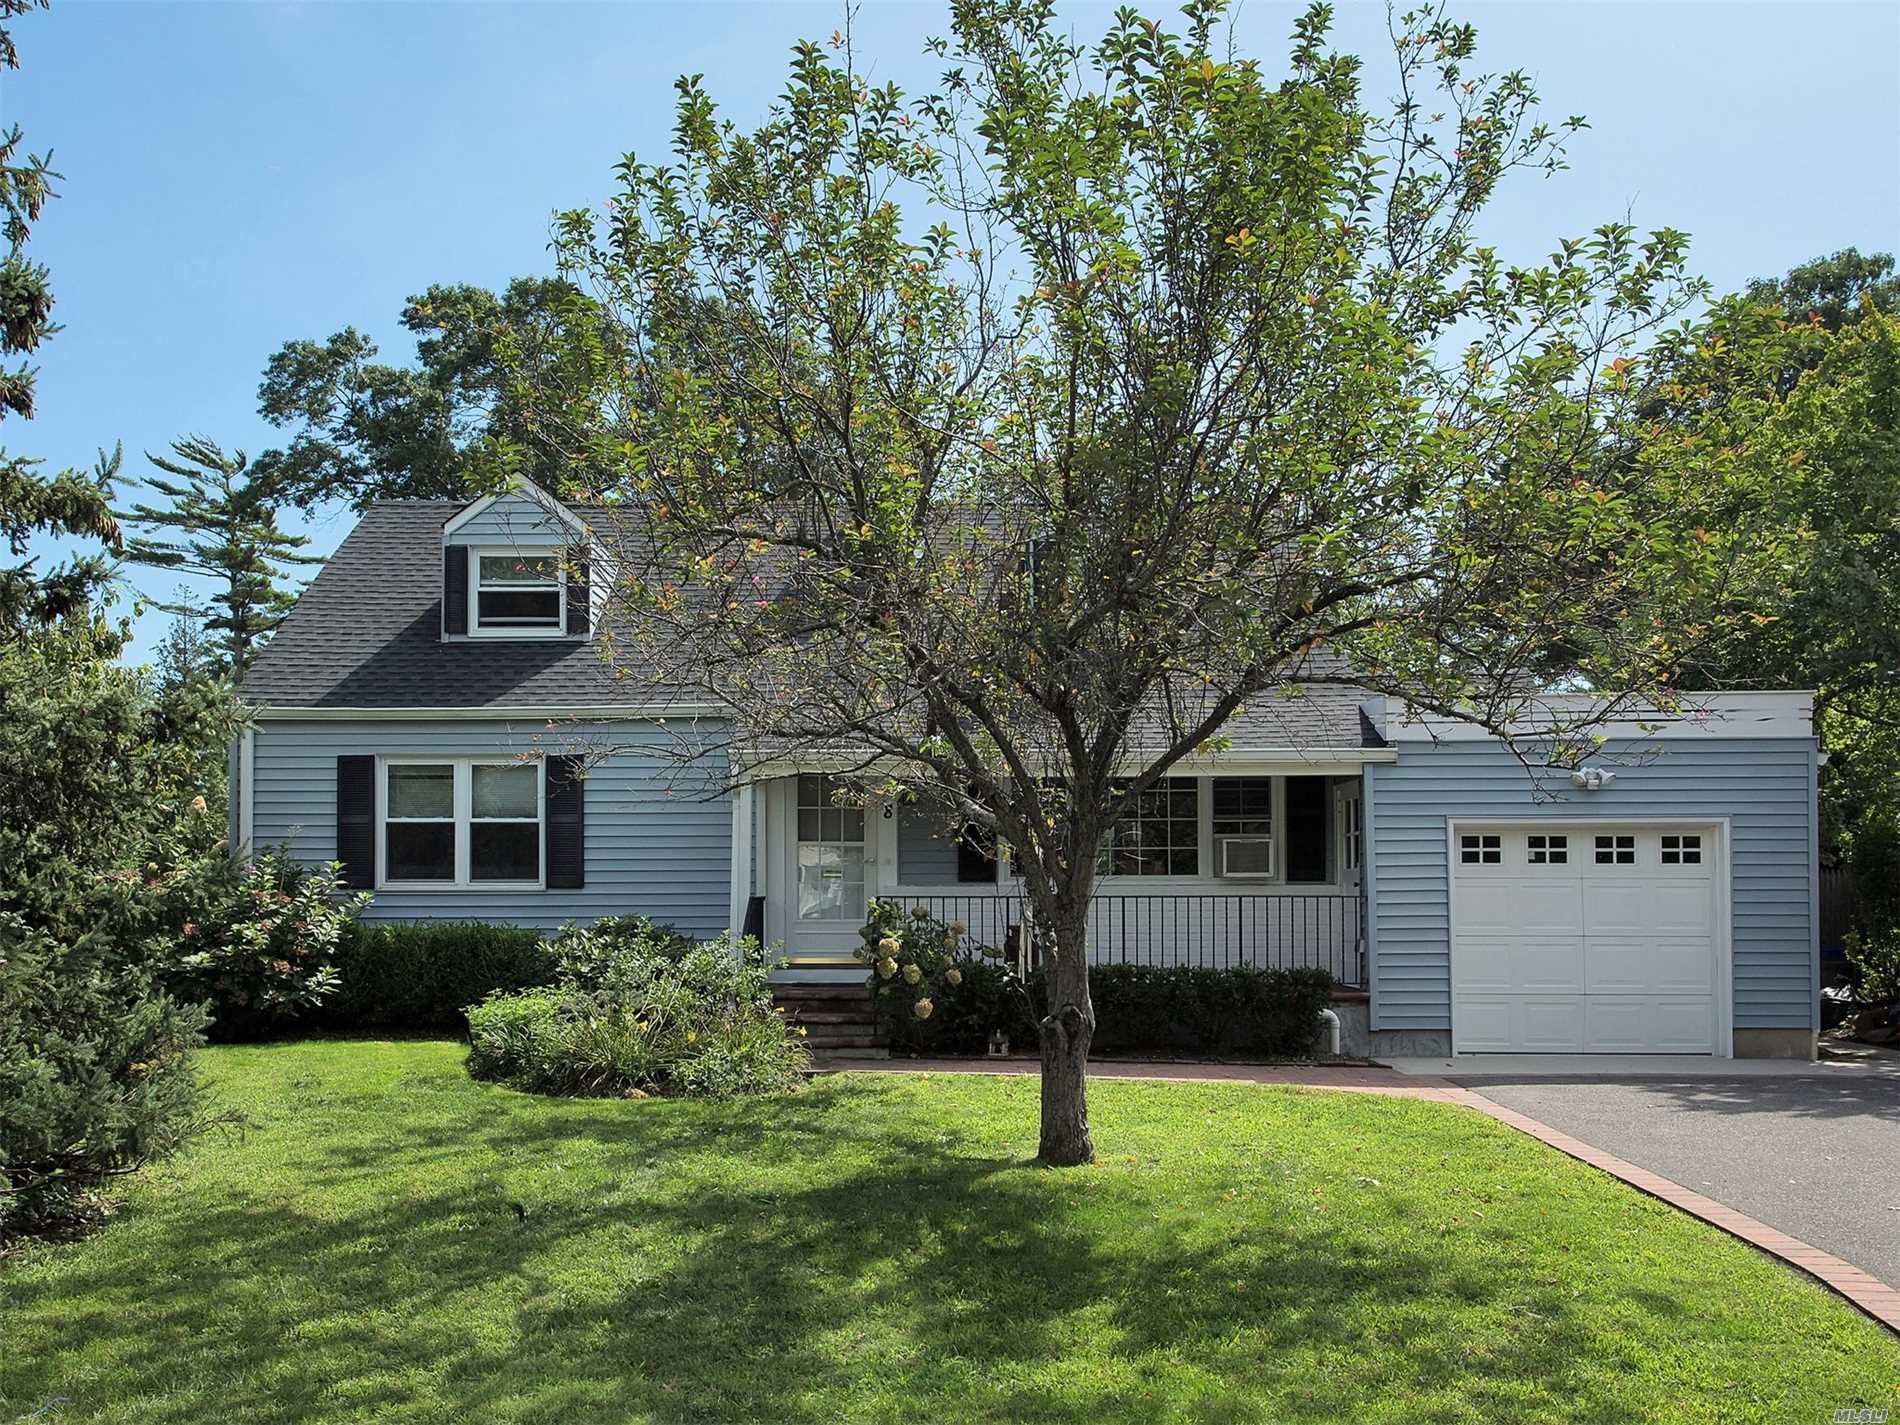 Must See This South Of Montauk 4 Bdrm/2 Bth Cape. Very Inviting. Warm And Bright. . All Hard Wood Floors. Beautifully Landscaped/ Private Bk Yard.  Assoc. Docking. Comes With Your Own Slip. X Zone